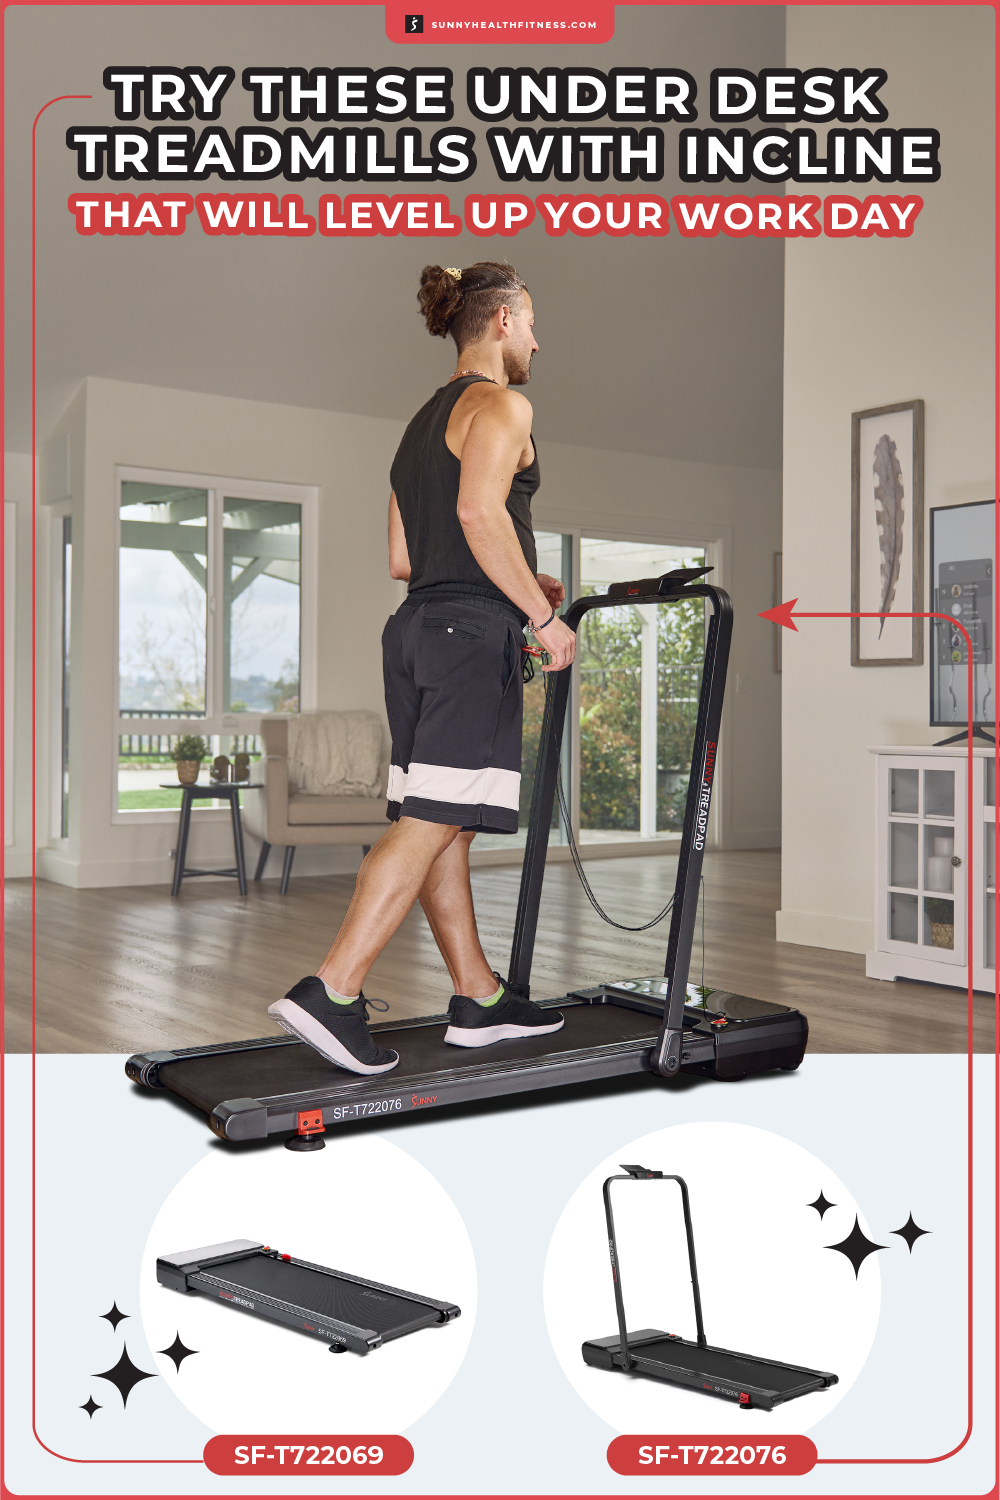 Under Desk Treadmills With Incline Infographic